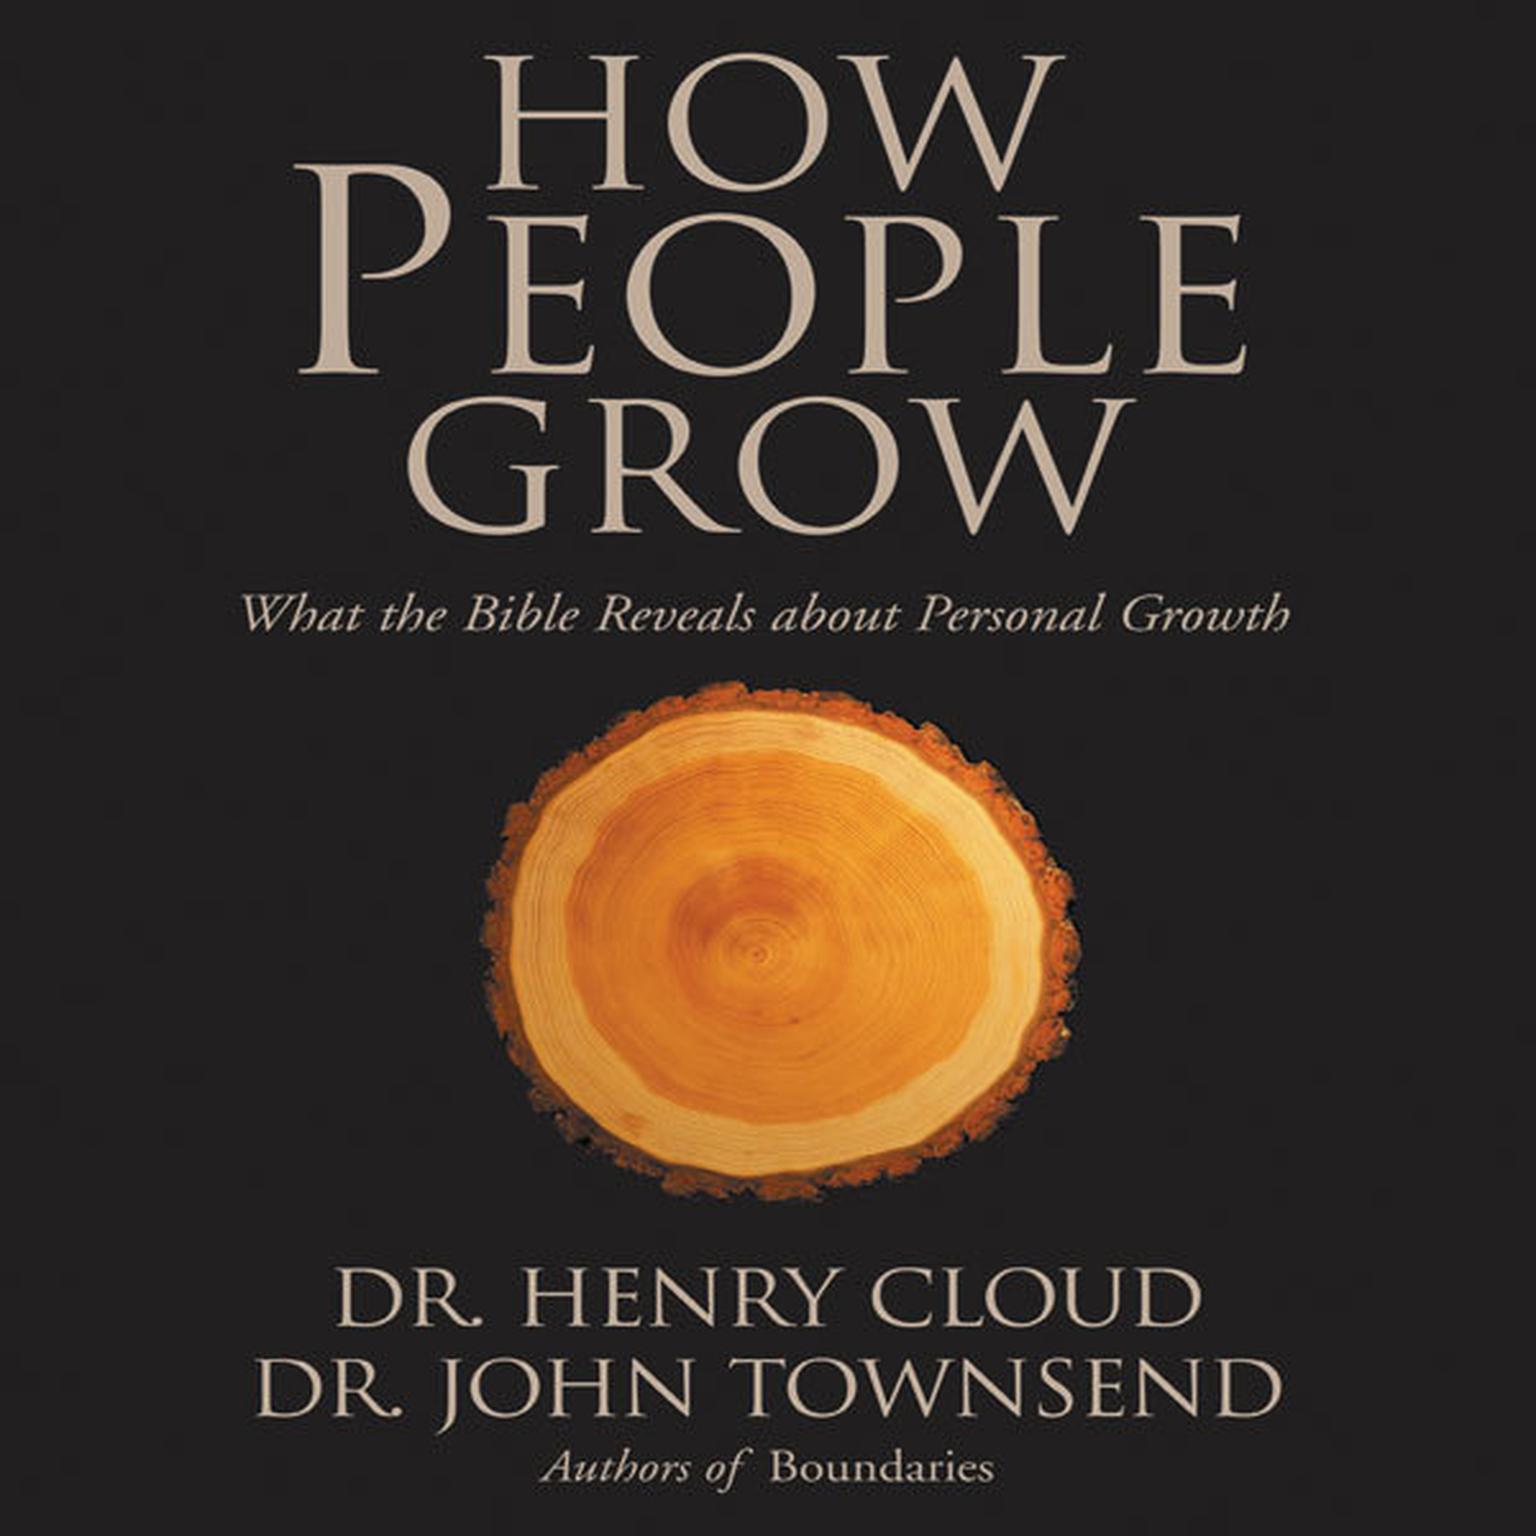 How People Grow (Abridged): What the Bible Reveals about Personal Growth Audiobook, by Henry Cloud